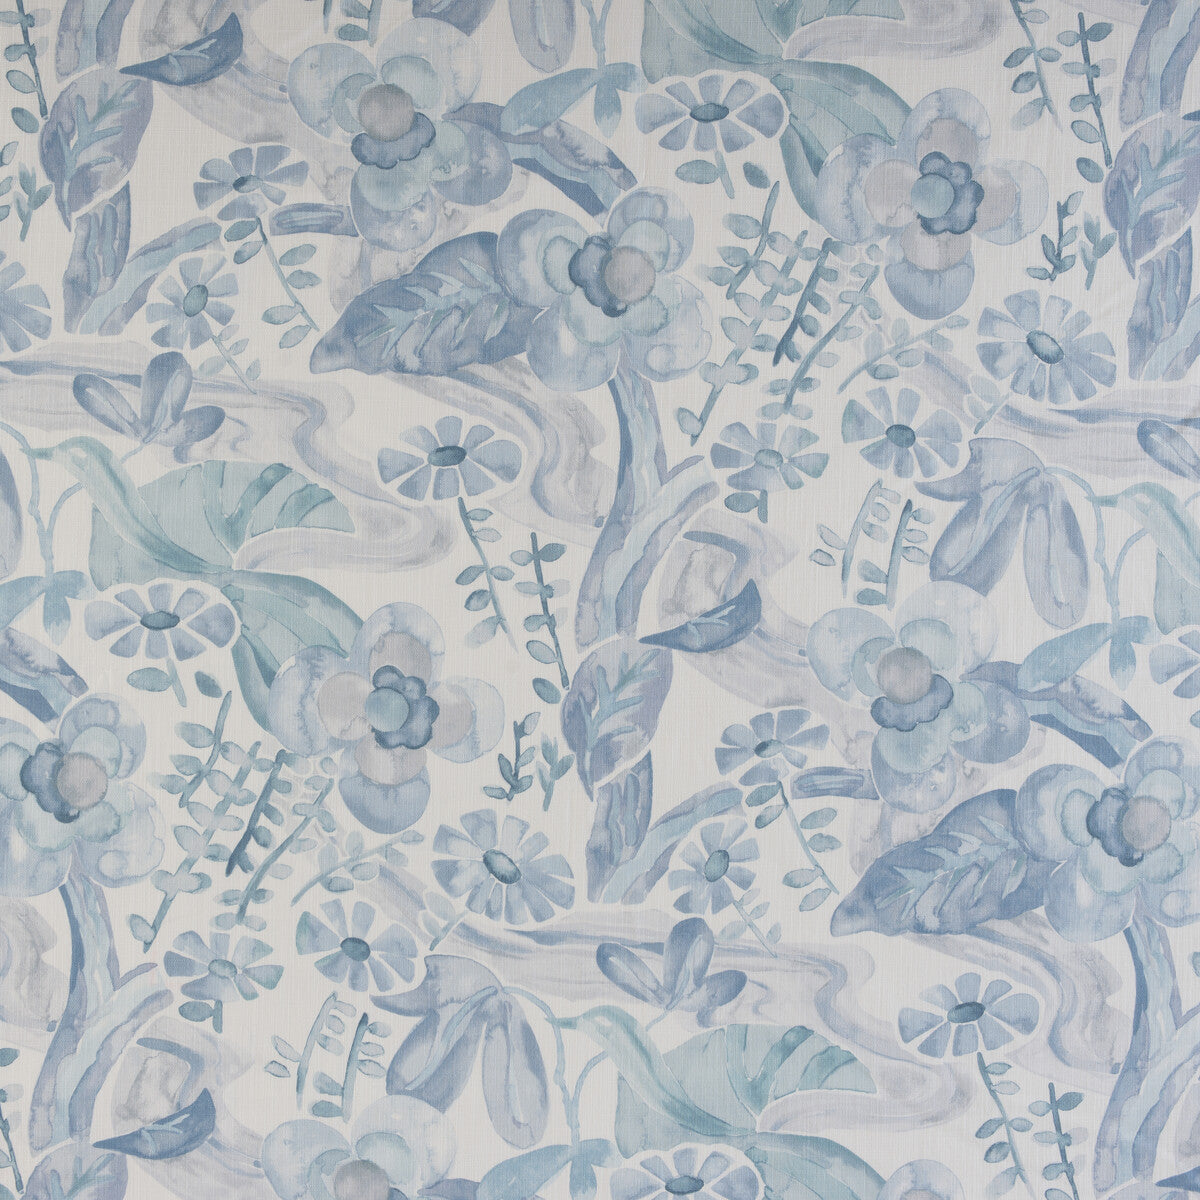 Faerie fabric in pacific color - pattern FAERIE.15.0 - by Kravet Design in the Barbara Barry Home Midsummer collection